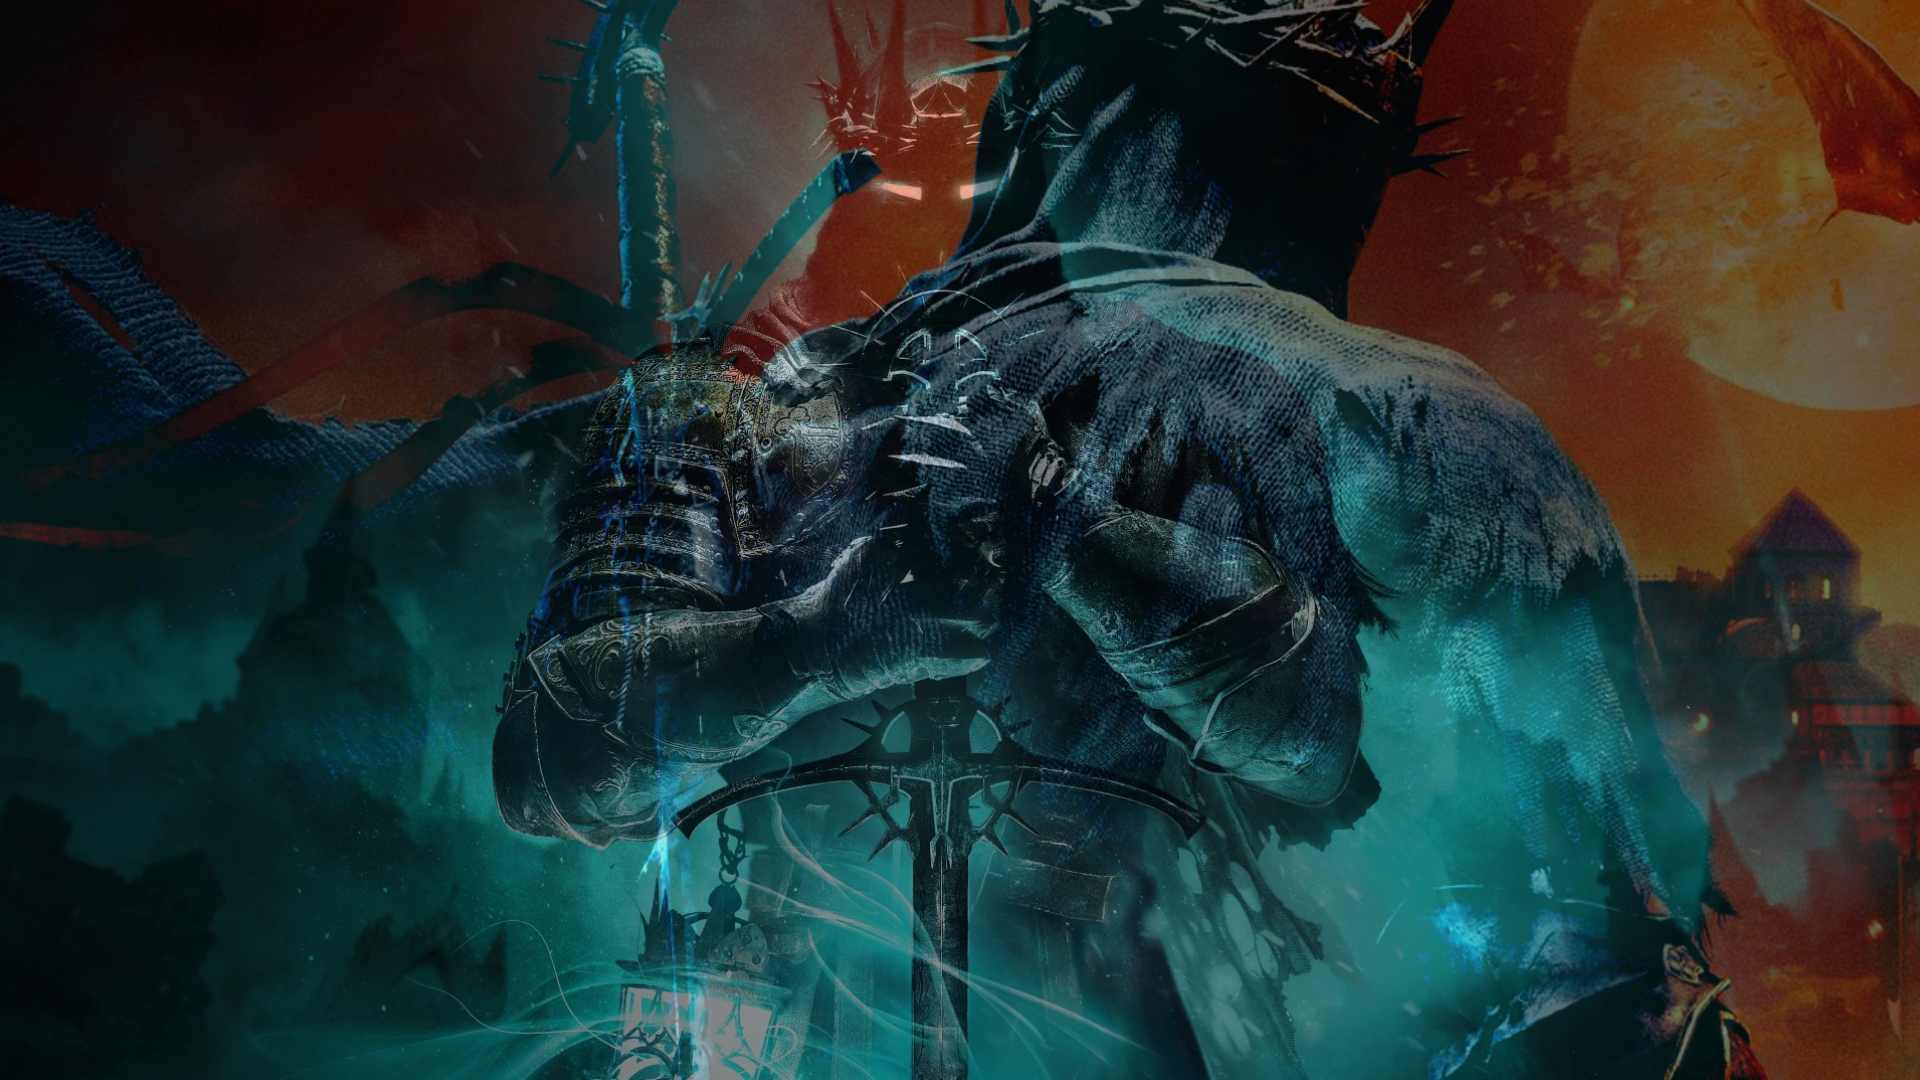 Xbox's day 1 patch for Lords of the Fallen delayed